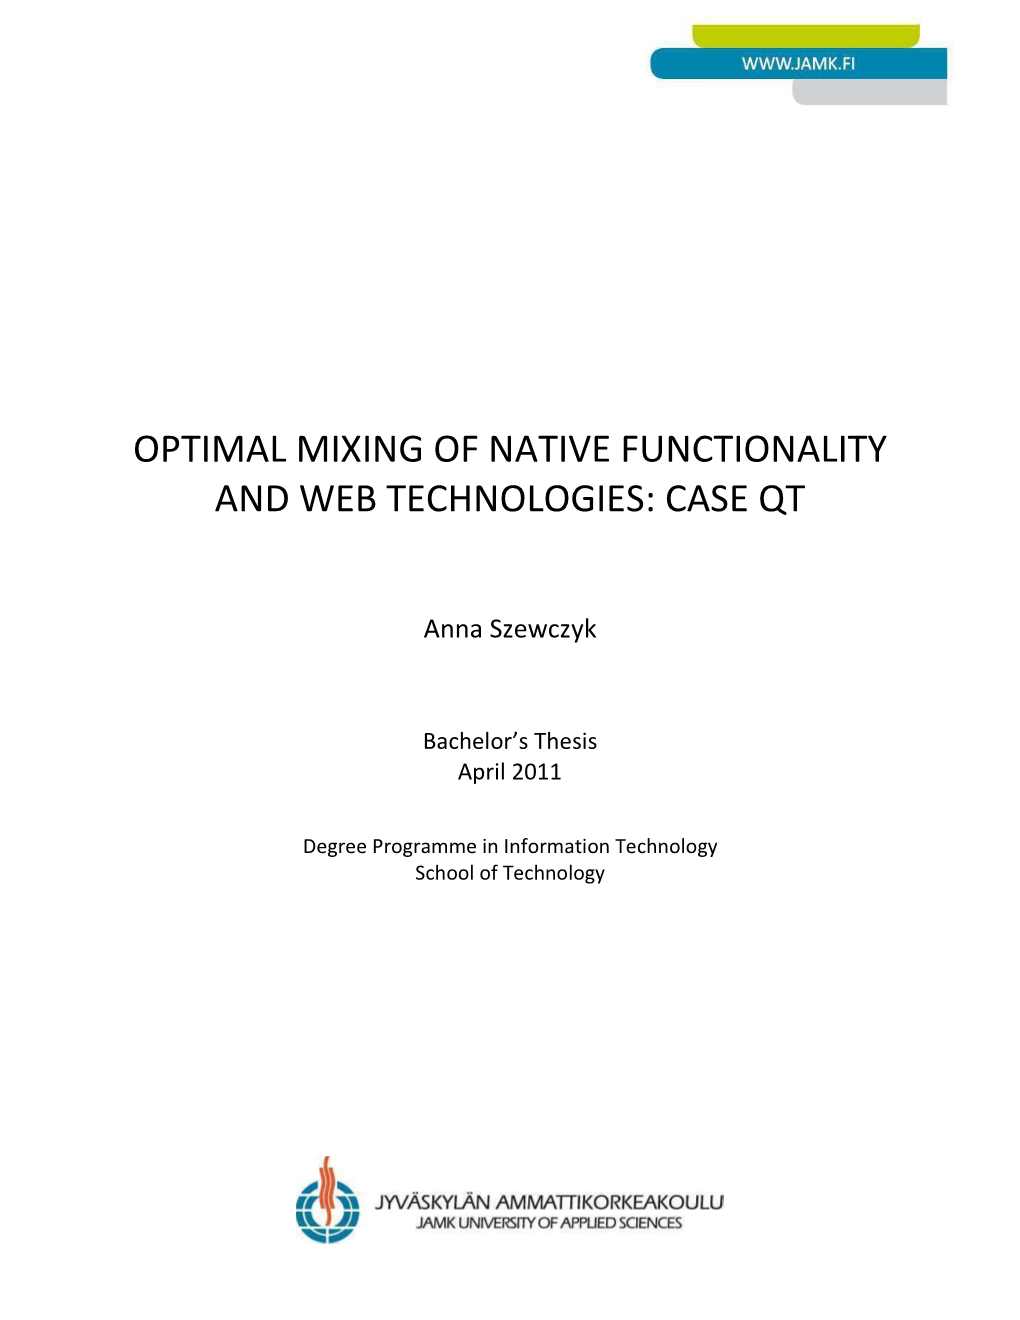 Optimal Mixing of Native Functionality and Web Technologies: Case Qt